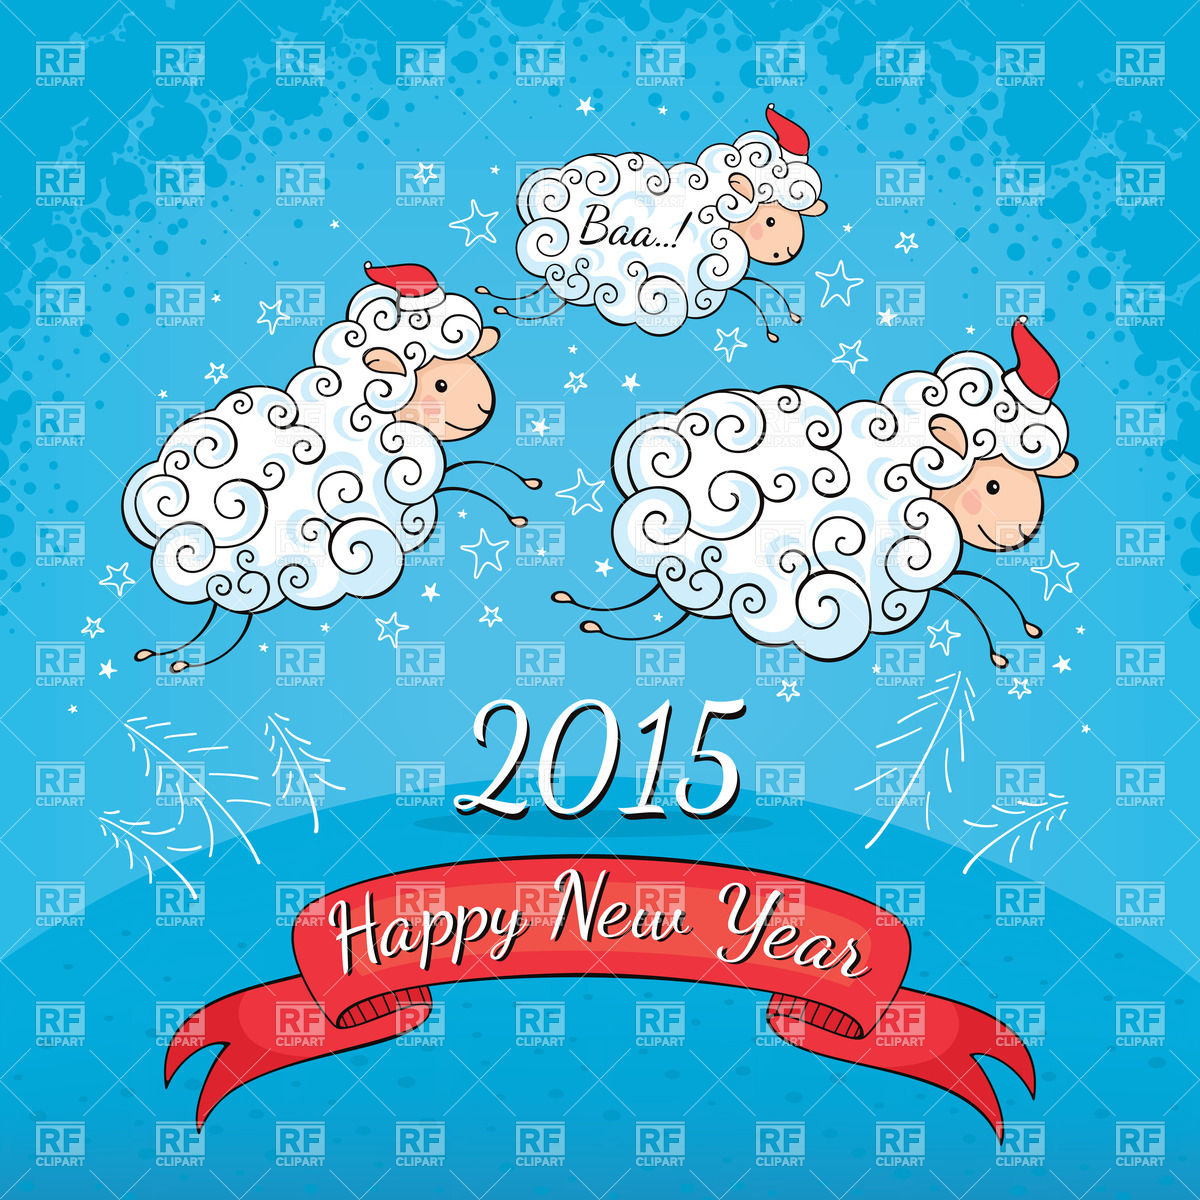 New Year Greeting Card With Cute Cartoon Sheeps Download Royalty Free